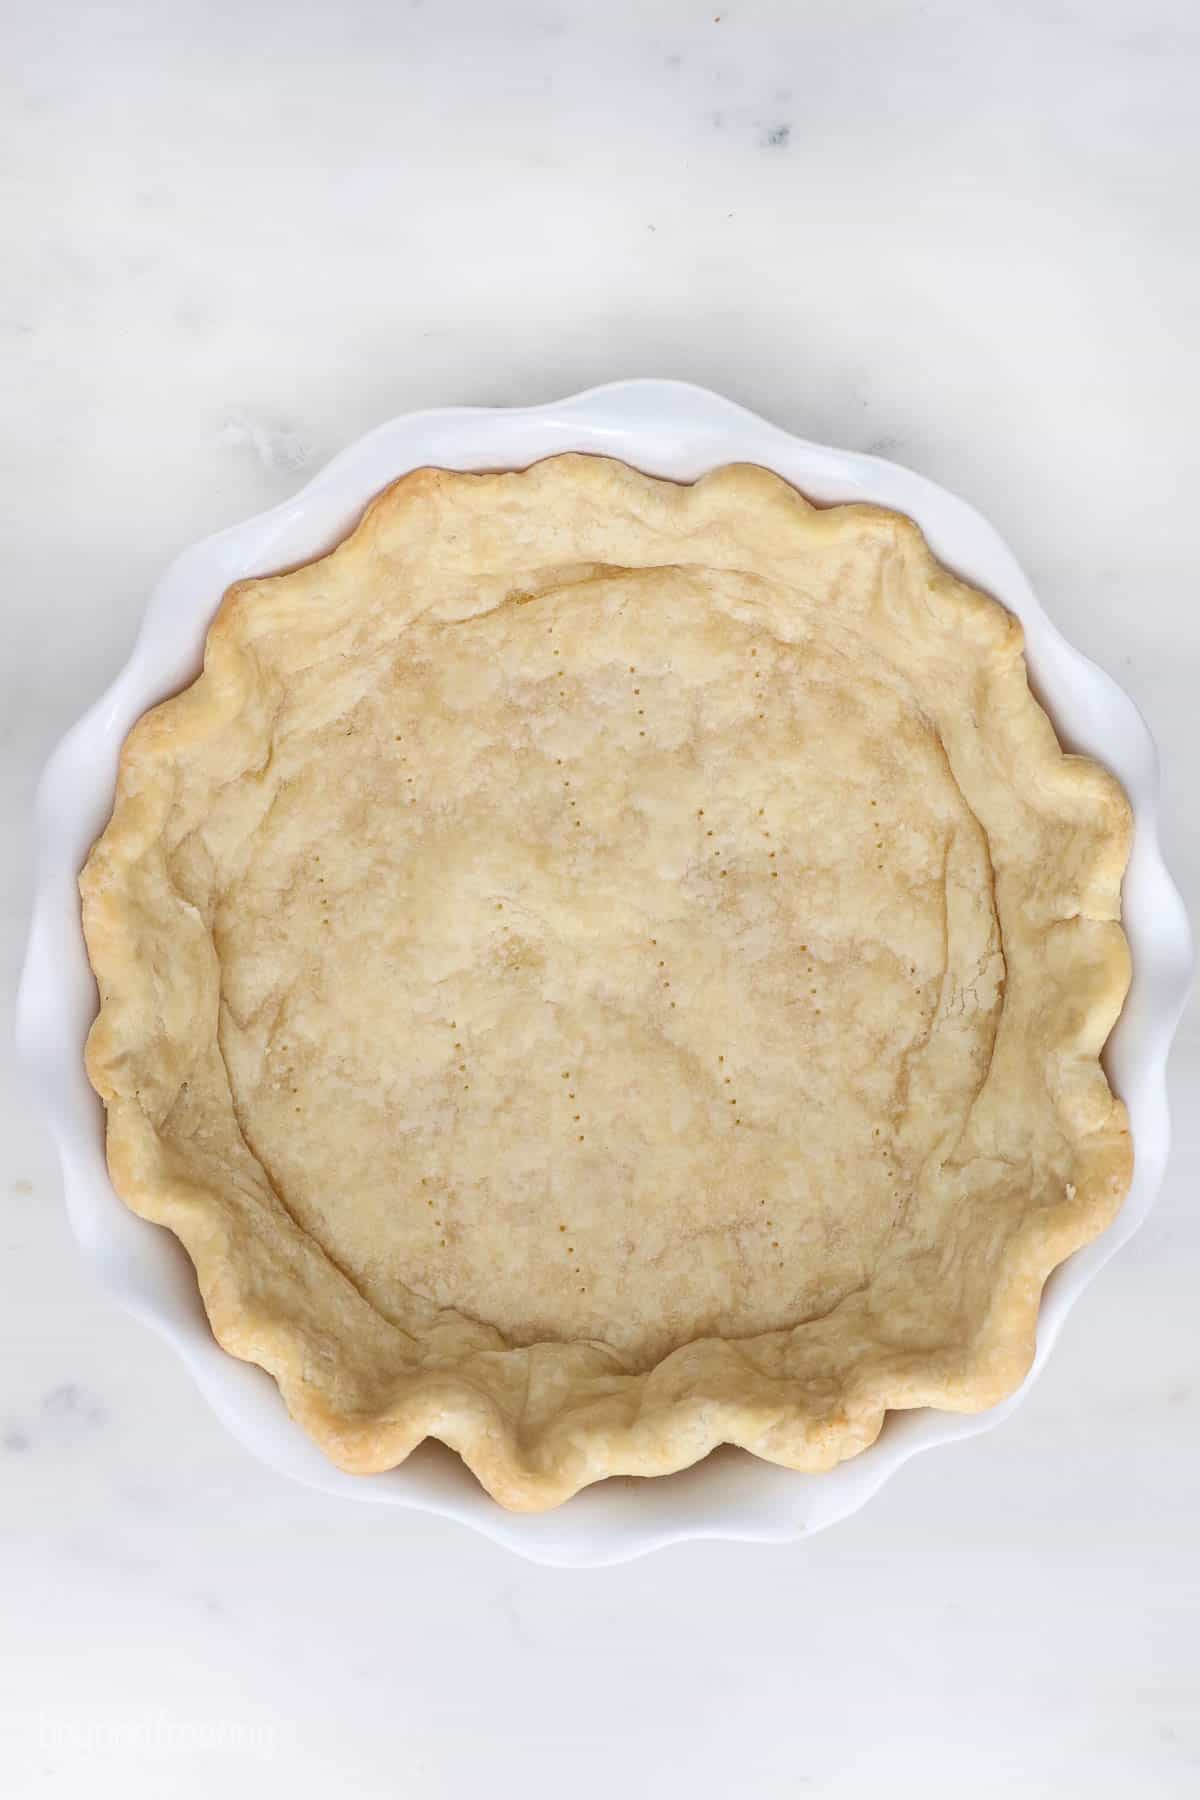 A partially baked pie crust with pinched edges inside of a white pie plate